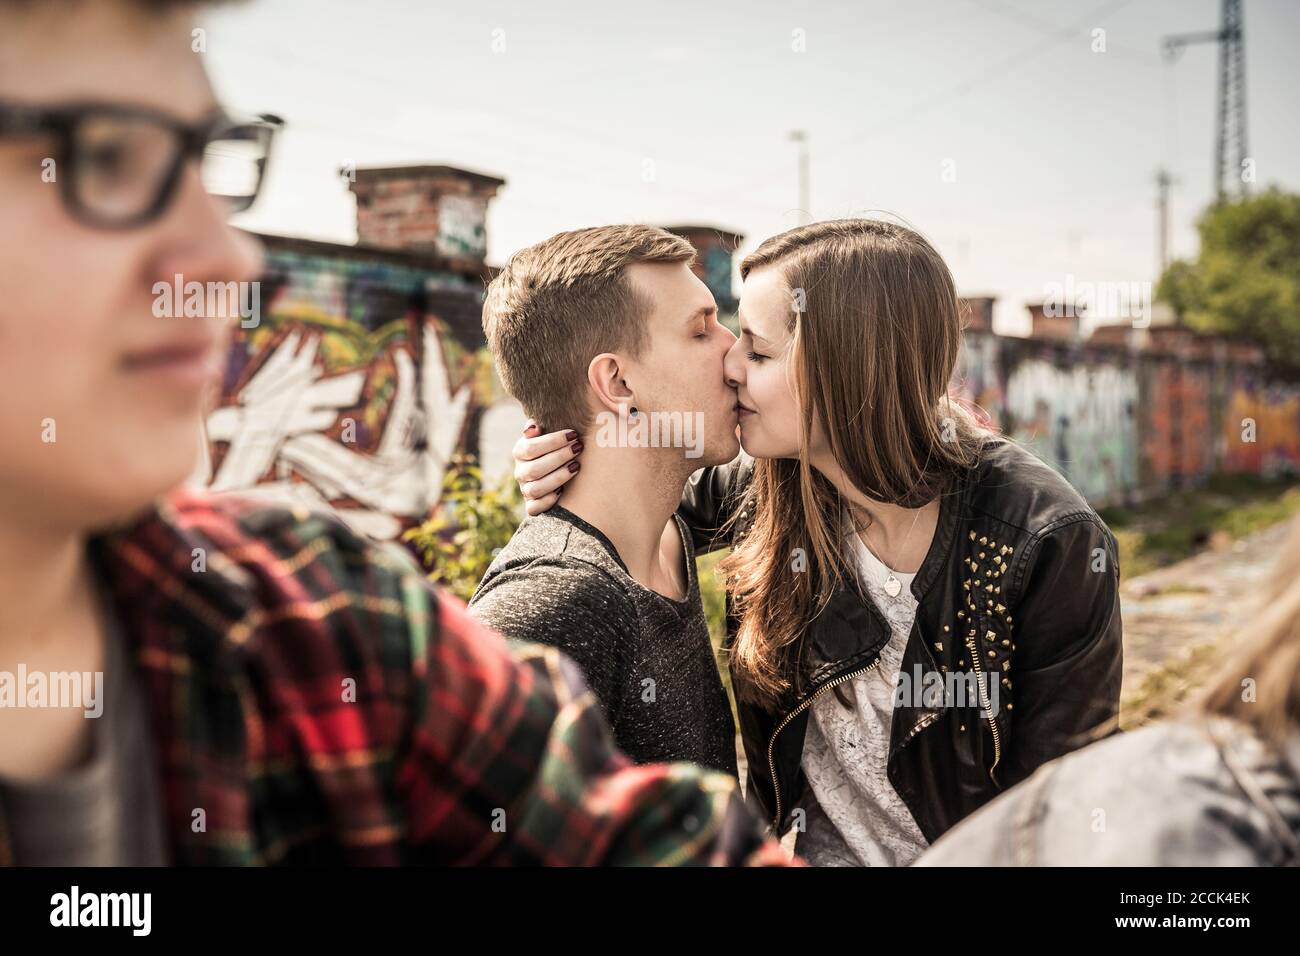 Teenage couple kissing in an old run down industrial area Stock Photo